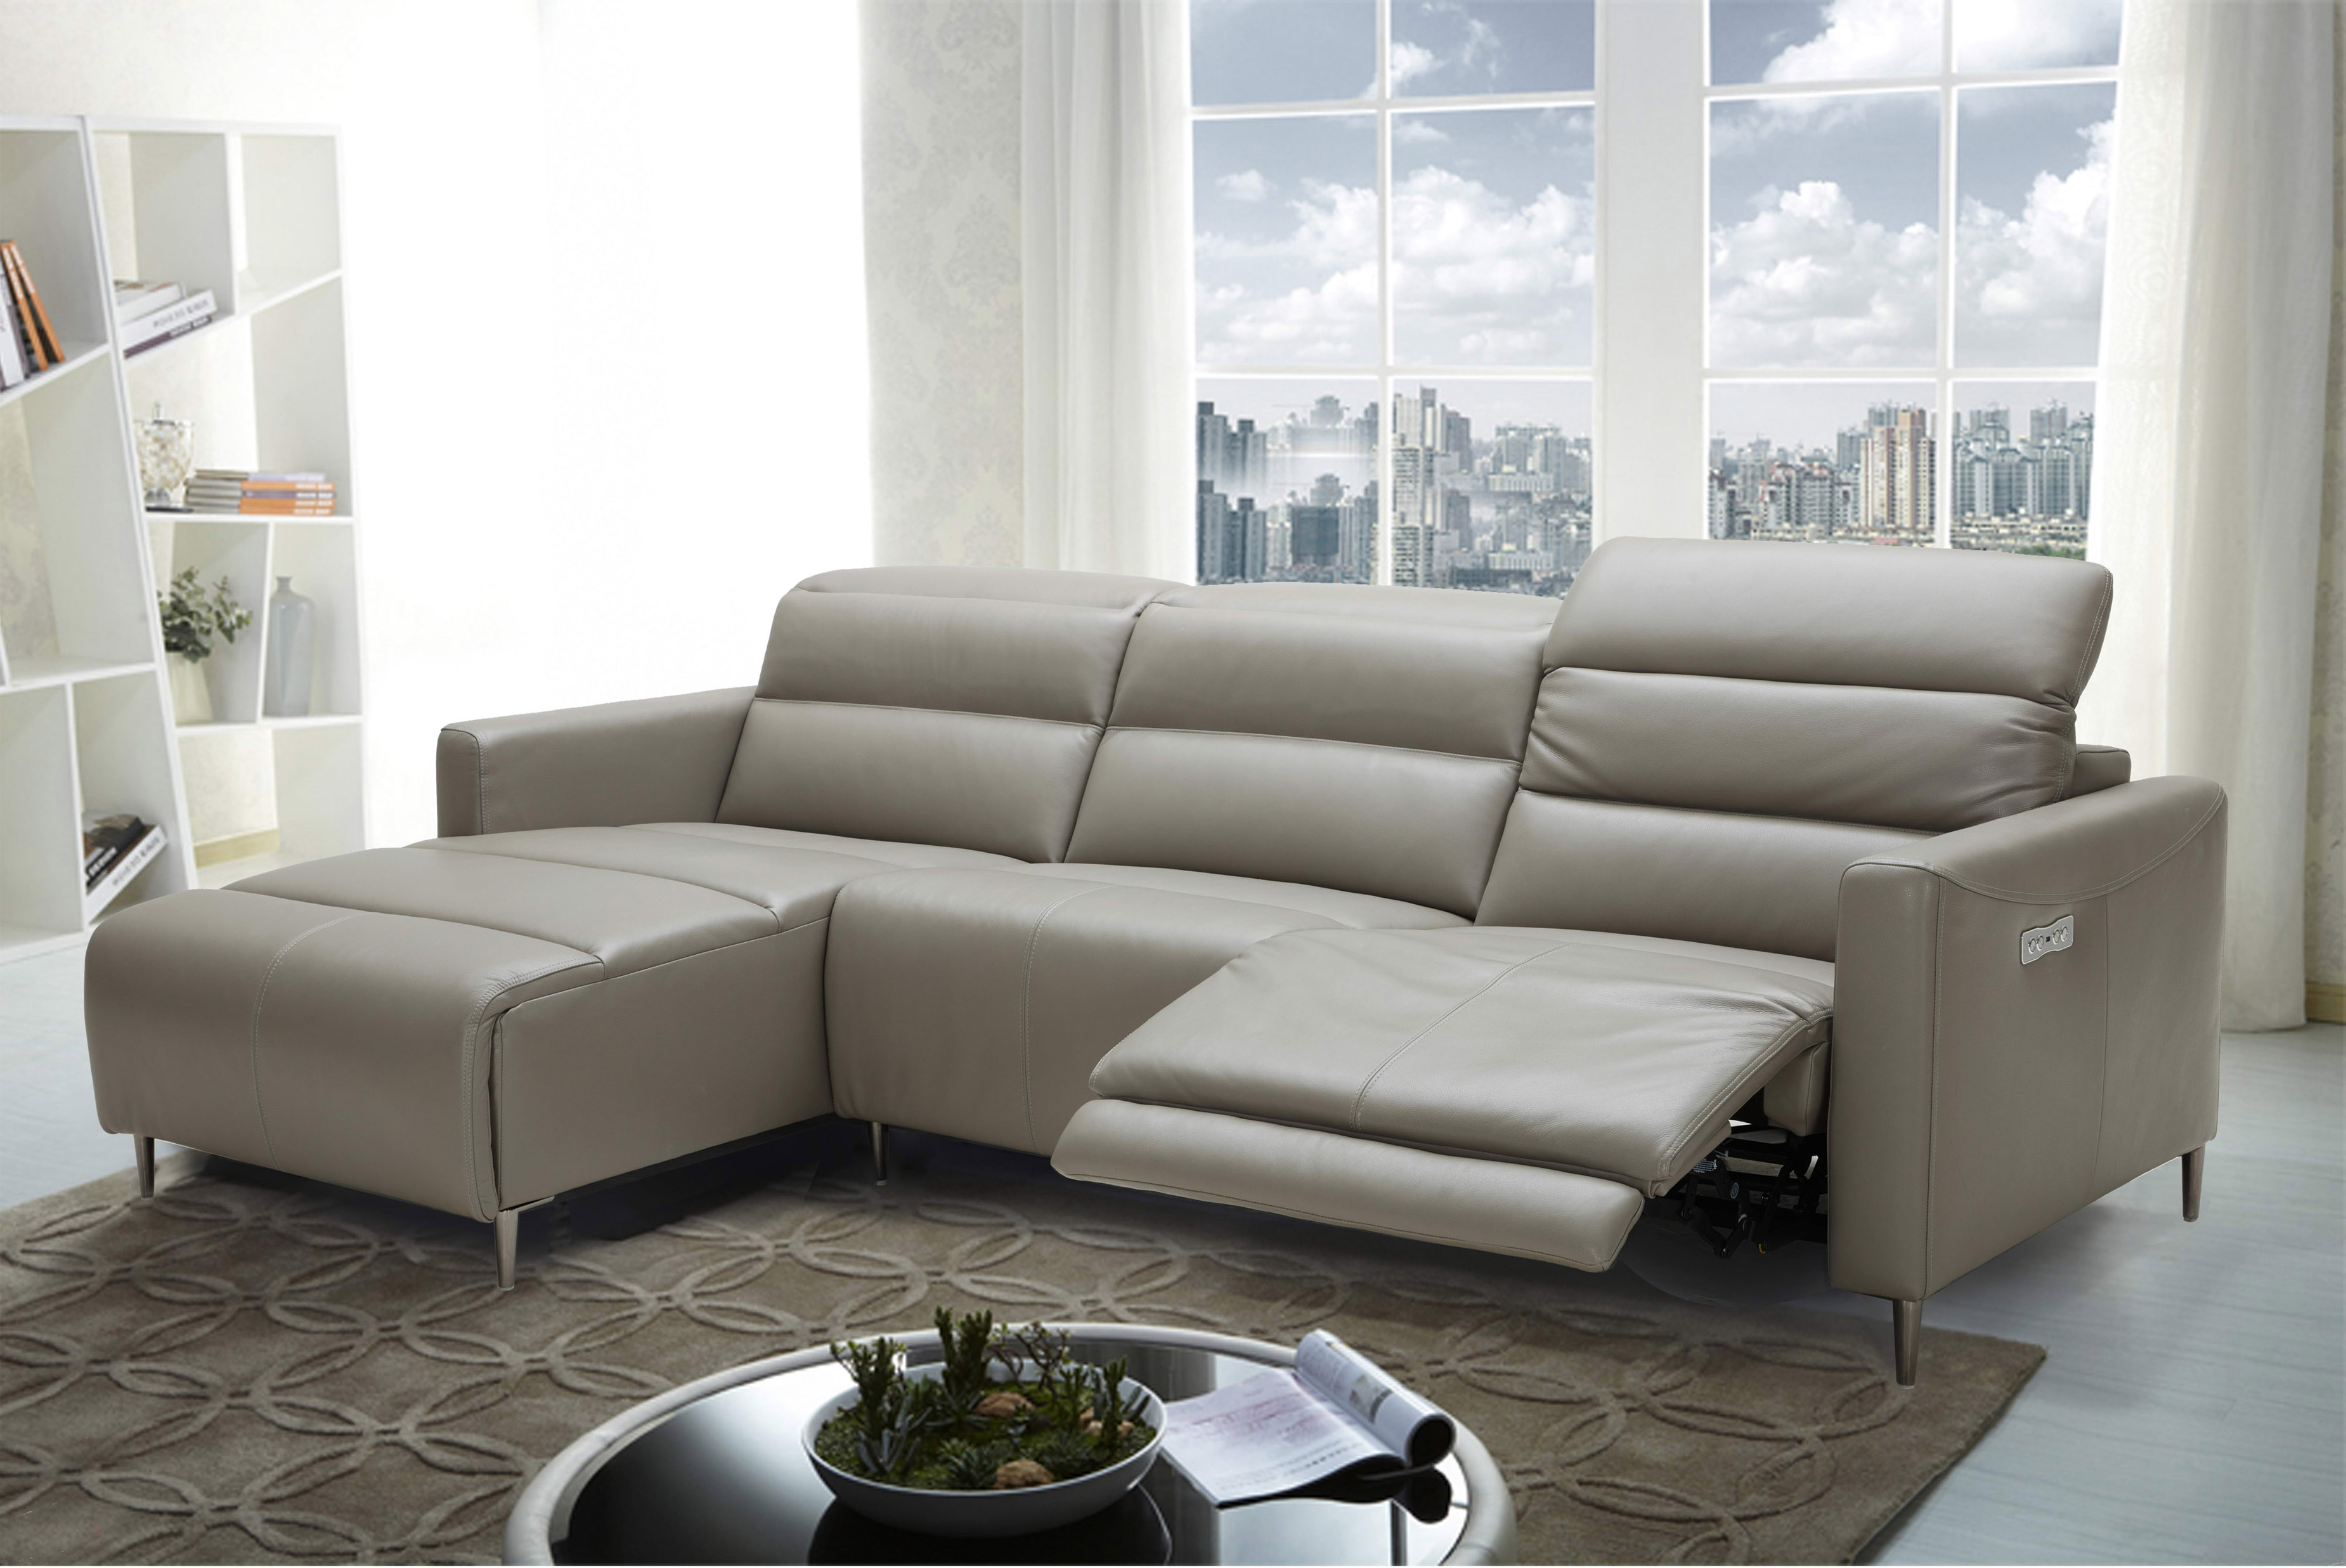 good quality leather living room furniture